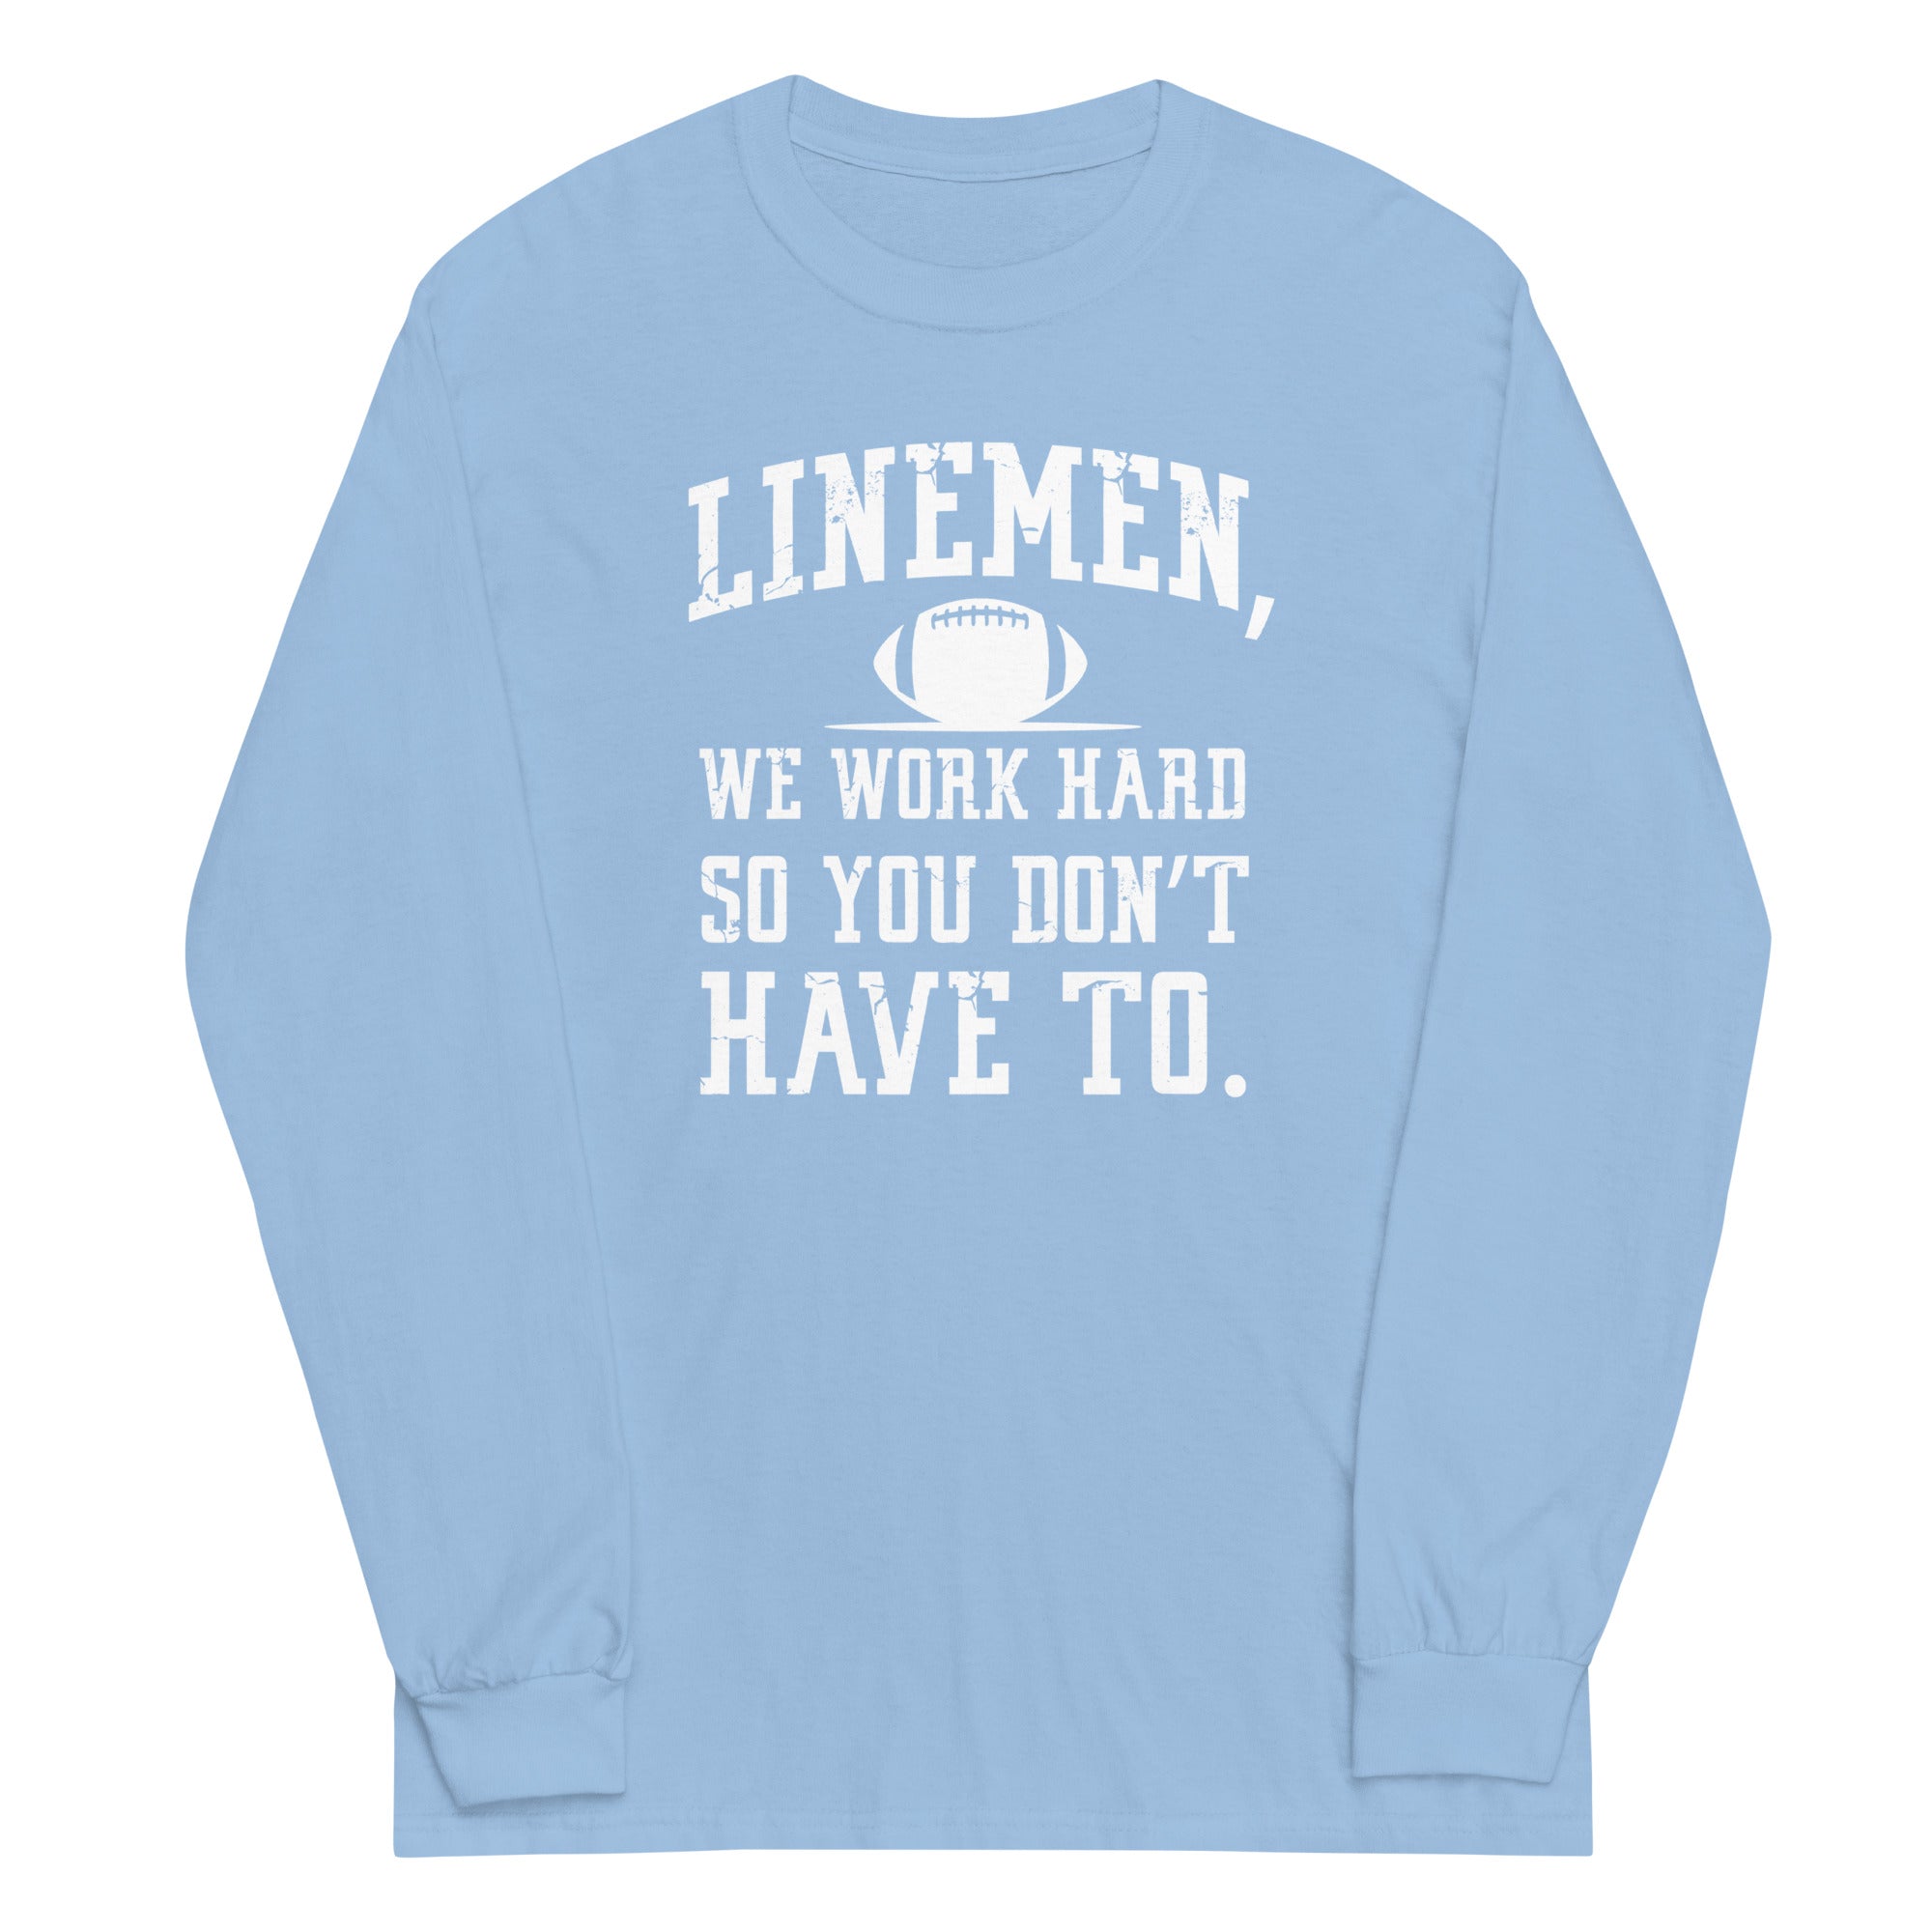 WE WORK HARD SO YOU DON'T HAVE TO - Long Sleeve T-Shirt